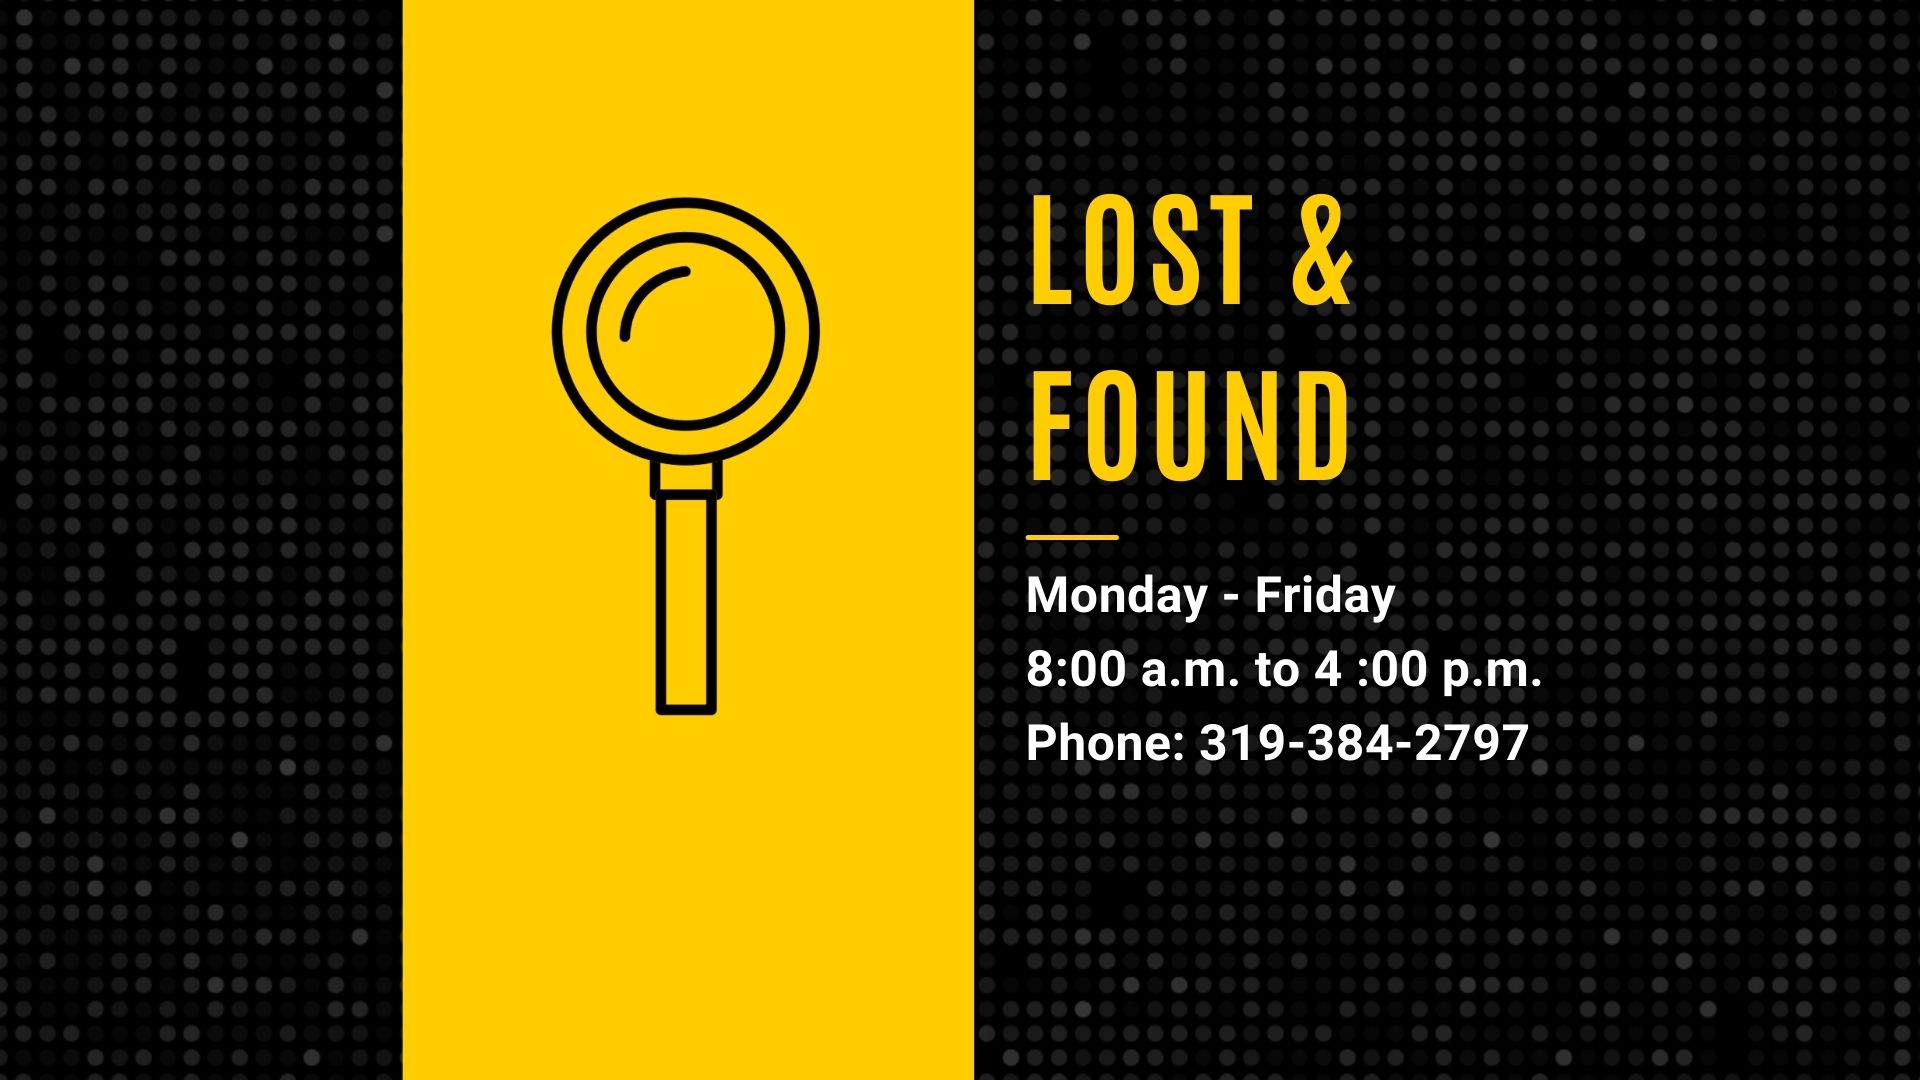 Lost and Found hours, Monday through Friday, 8 a.m. to 4 p.m. Phone: 319-384-2797